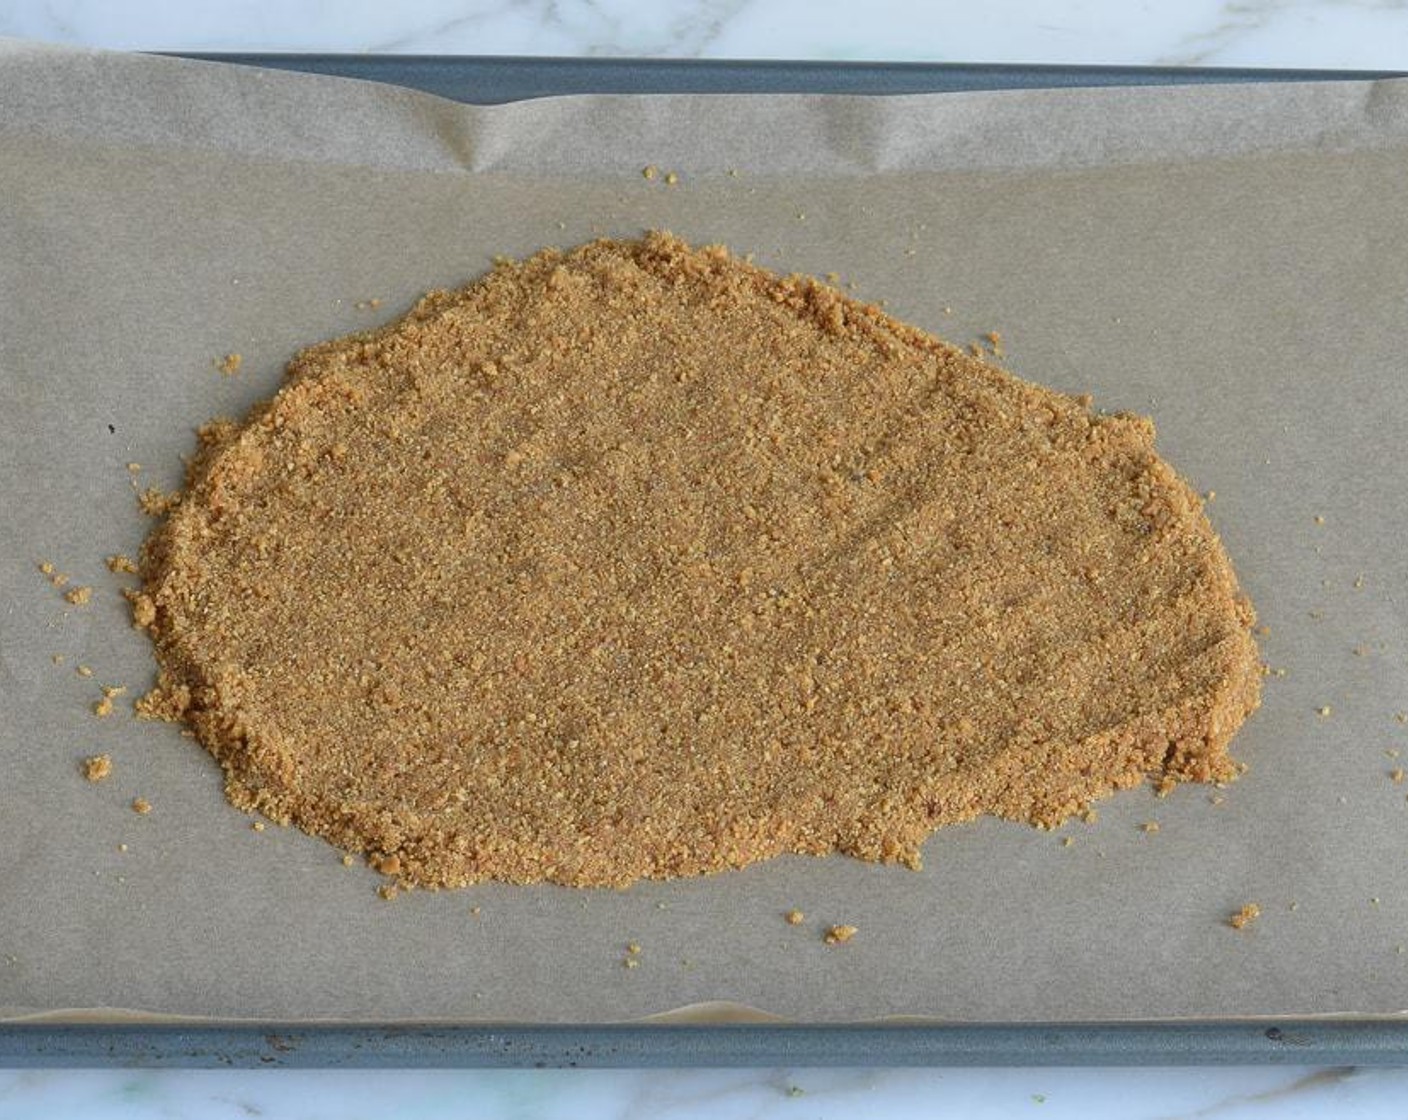 step 3 Press the crust into an even 1/4-inch layer on the prepared baking sheet. Bake until golden around the edges, 7 to 8 minutes.